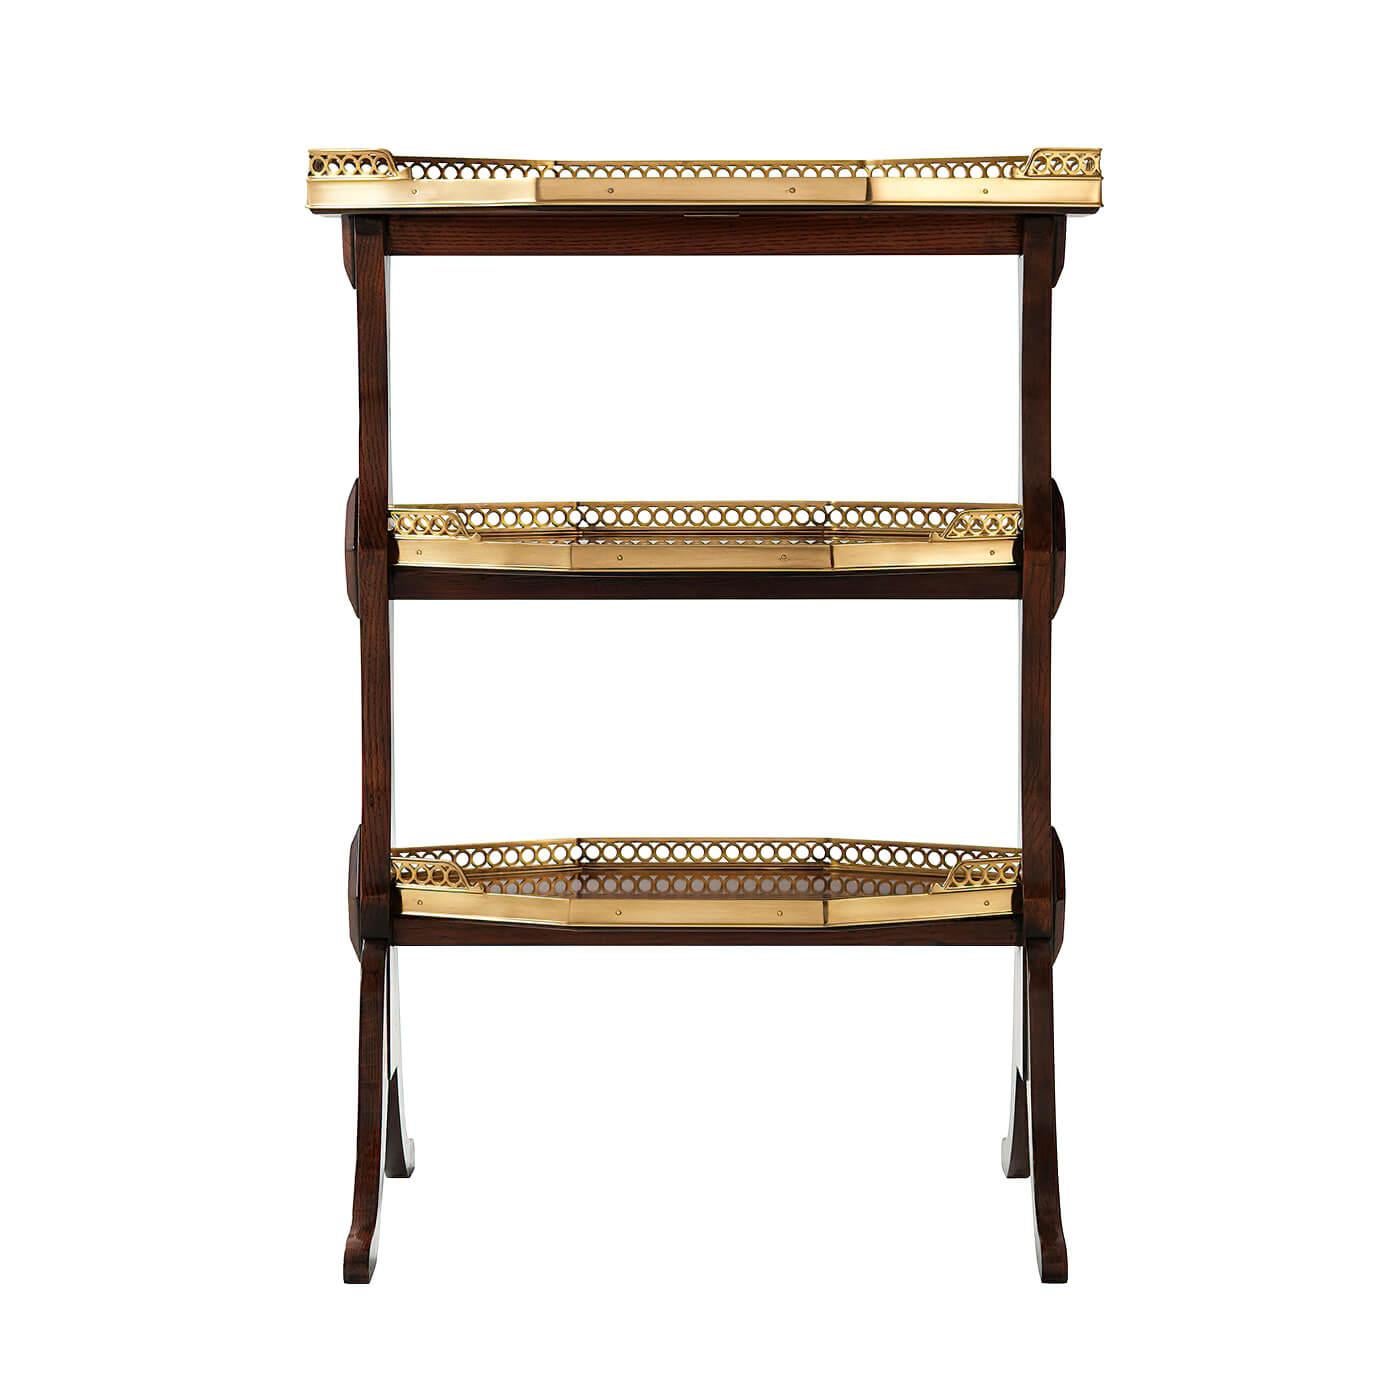 A French Directoire style three-tier lamp table, each elongated octagonal tier with a three-quarter pierced brass gallery, on shaped end supports with lozenge ornaments, terminating in splayed feet.

Dimensions: 20.5